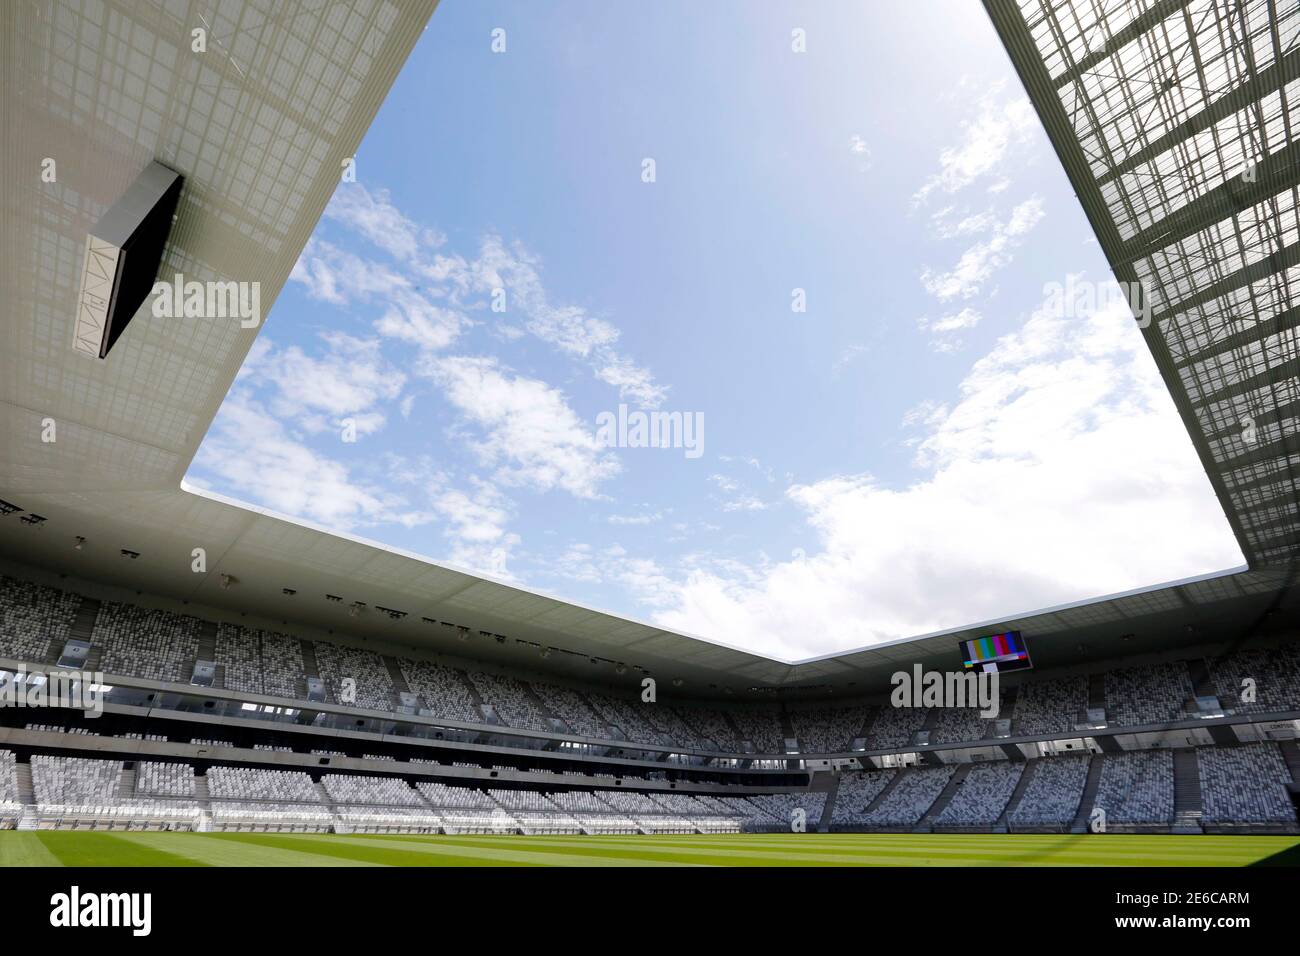 A general view shows the new stadium in Bordeaux, southwestern France, home  of the French Ligue 1 Girondins Bordeaux soccer club, May 5, 2015. The new  stadium, with a capacity of 42,115